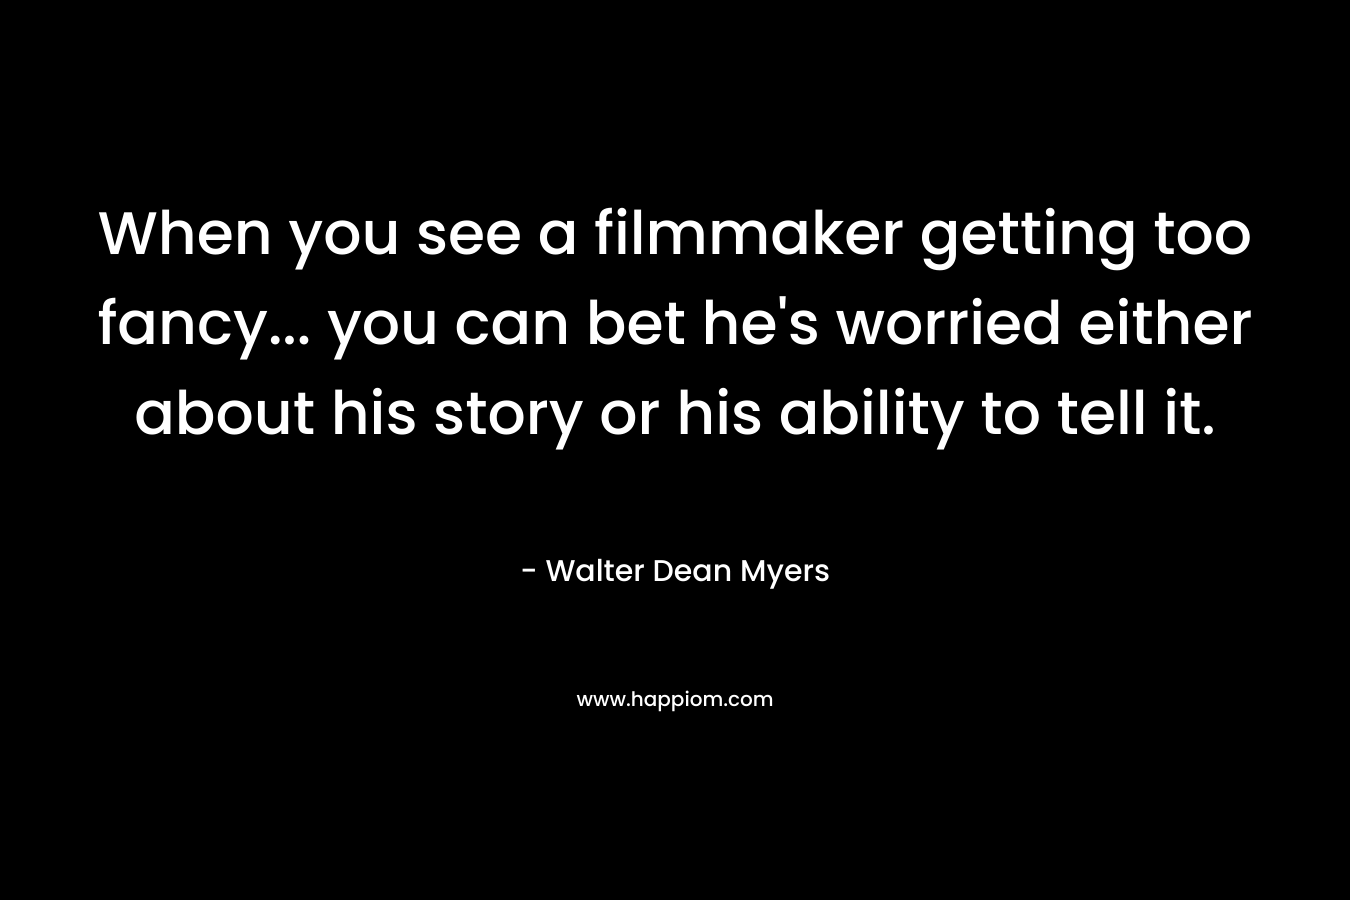 When you see a filmmaker getting too fancy… you can bet he’s worried either about his story or his ability to tell it. – Walter Dean Myers